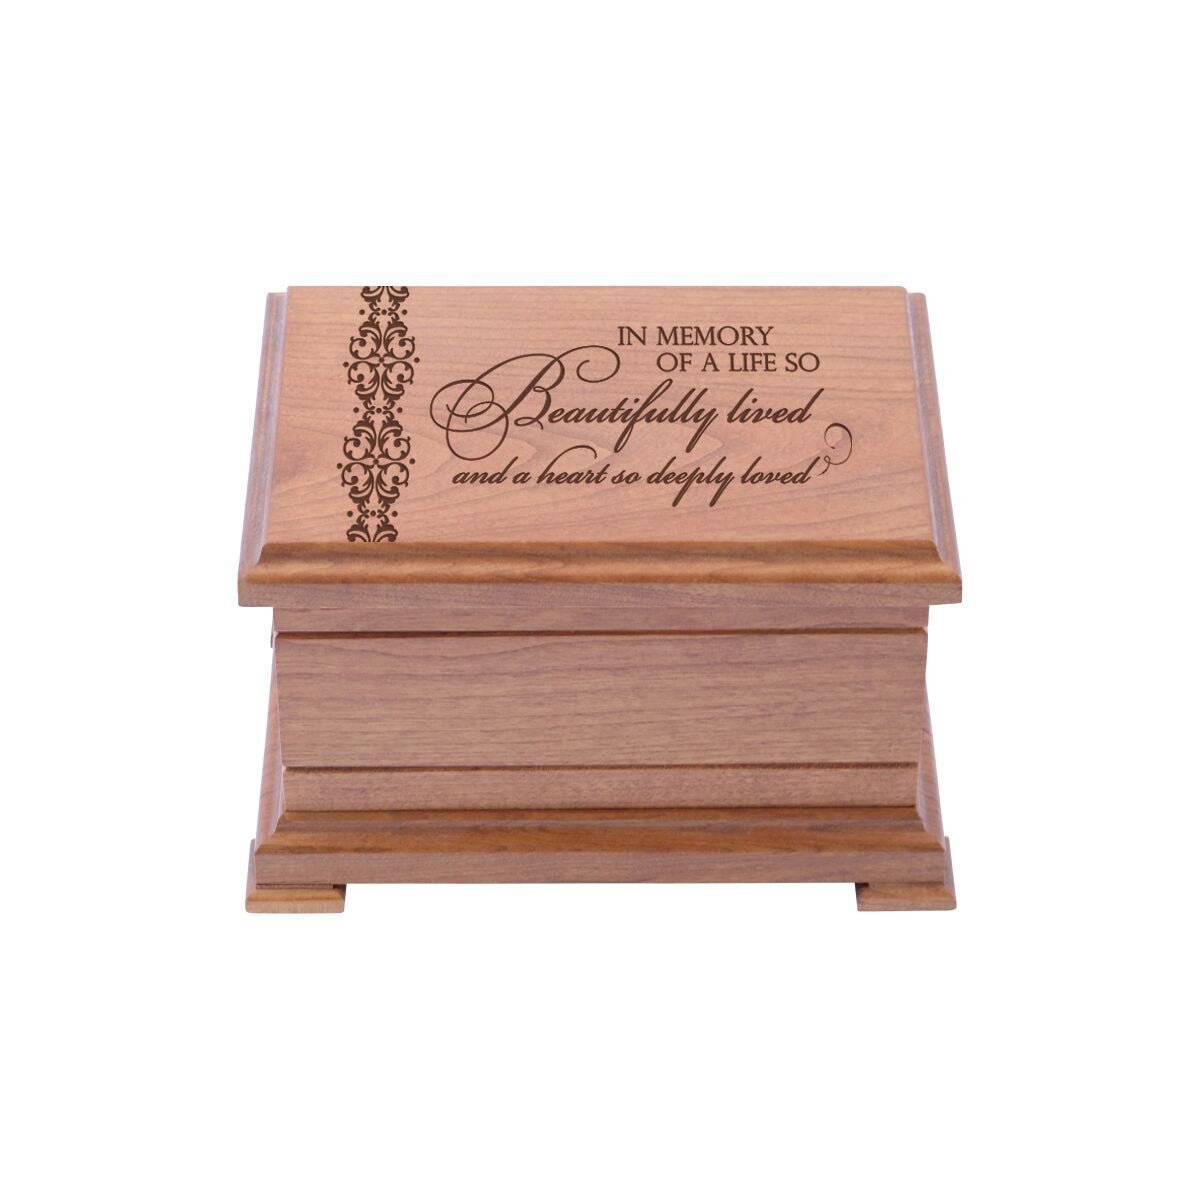 Engraved Wooden Urn Box for Human Ashes 9.75&quot; x 7.75&quot; x 4.25&quot; holds 210 cu in In Memory Of A Life - LifeSong Milestones